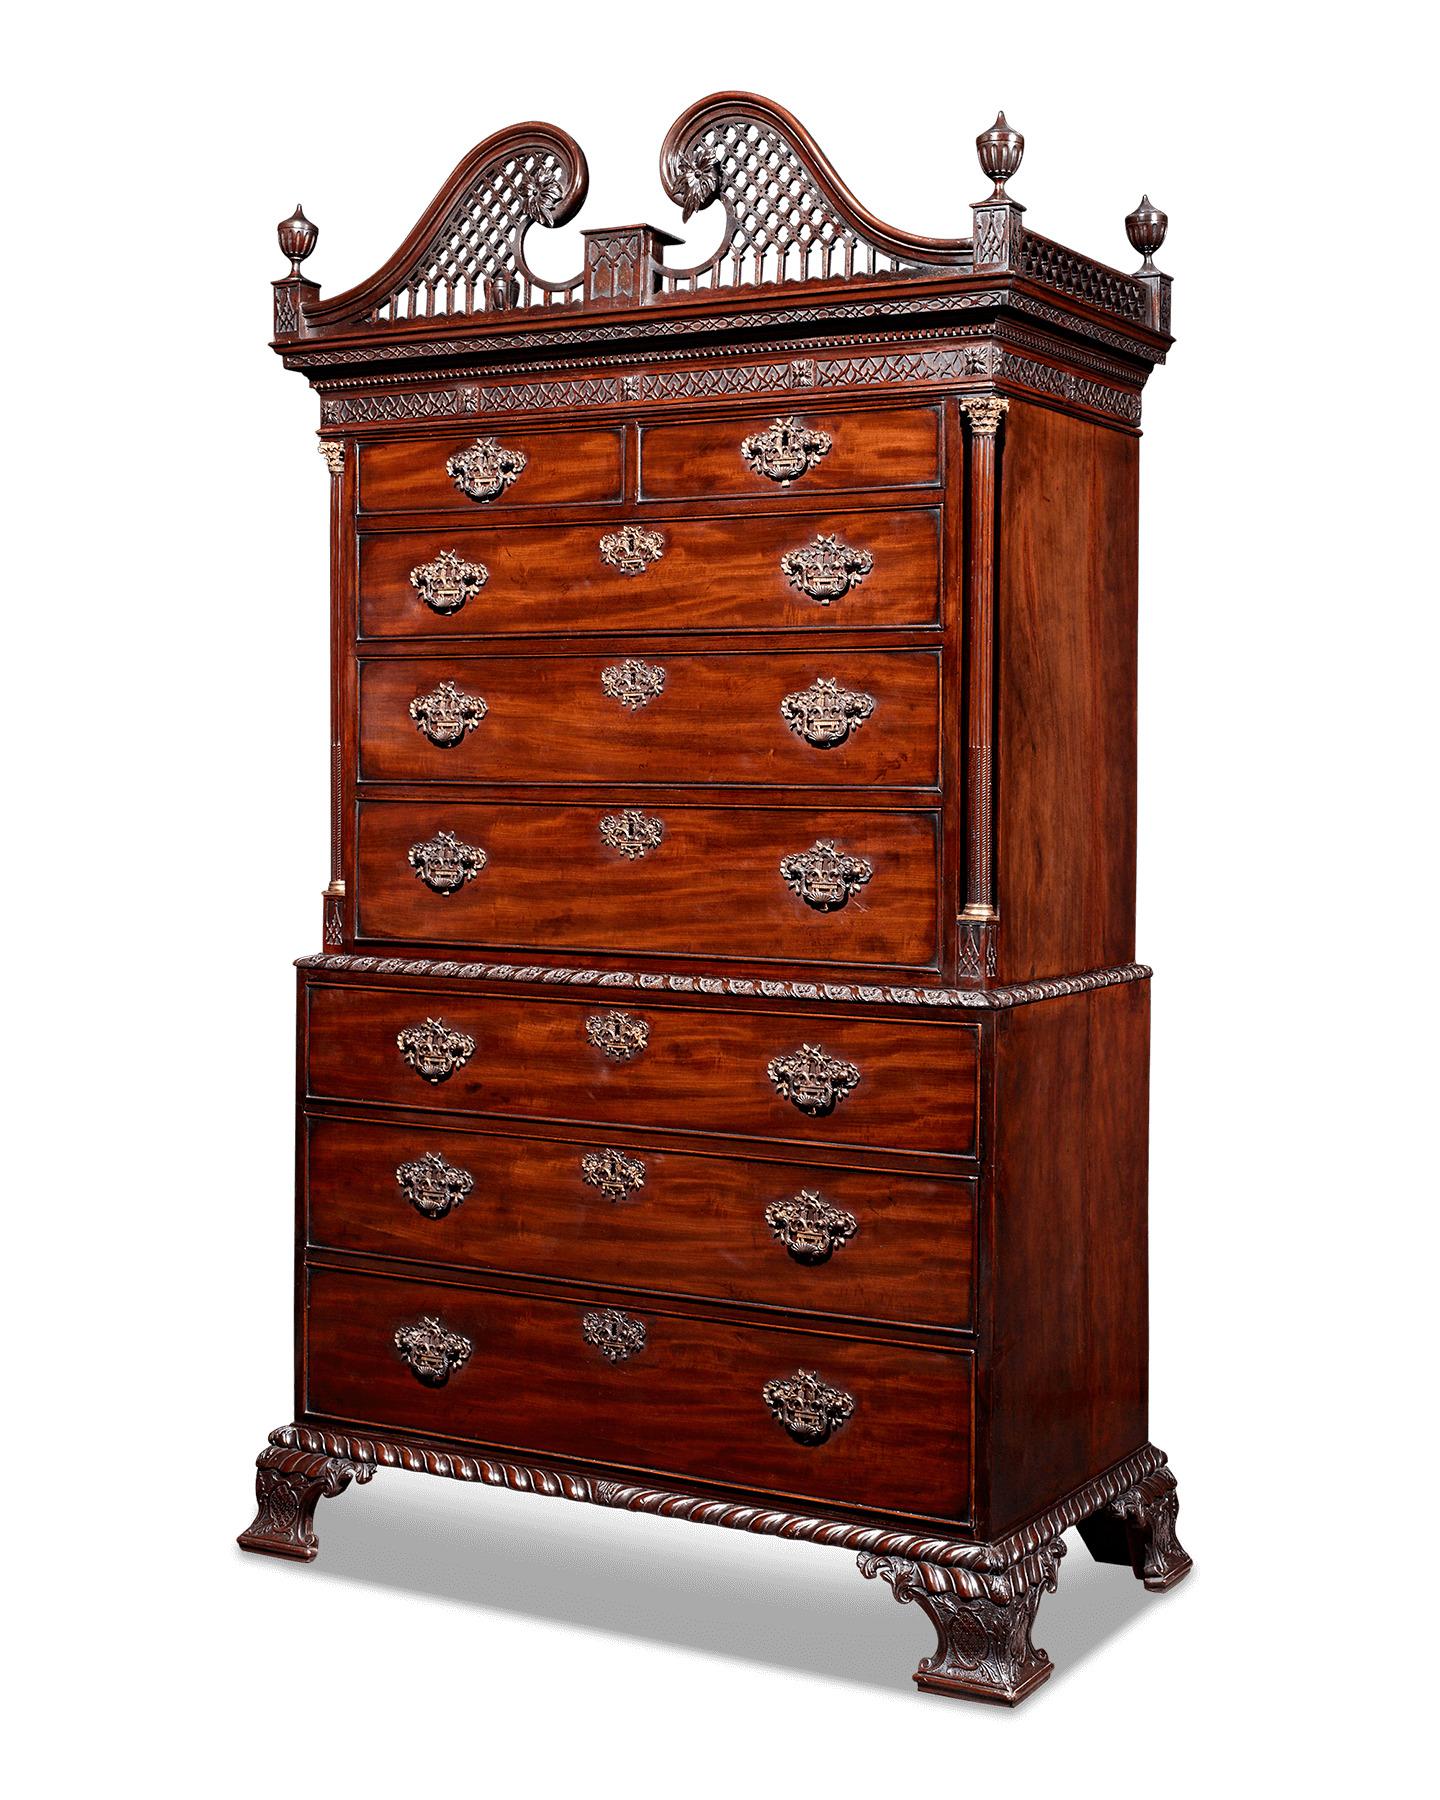 This monumental chest-on-chest attributed to the workshops of Thomas Chippendale displays all of the hallmarks of furnishings crafted by the master’s hand. An undeniable masterpiece, the mahogany cabinet is exemplary of Chippendale's signature